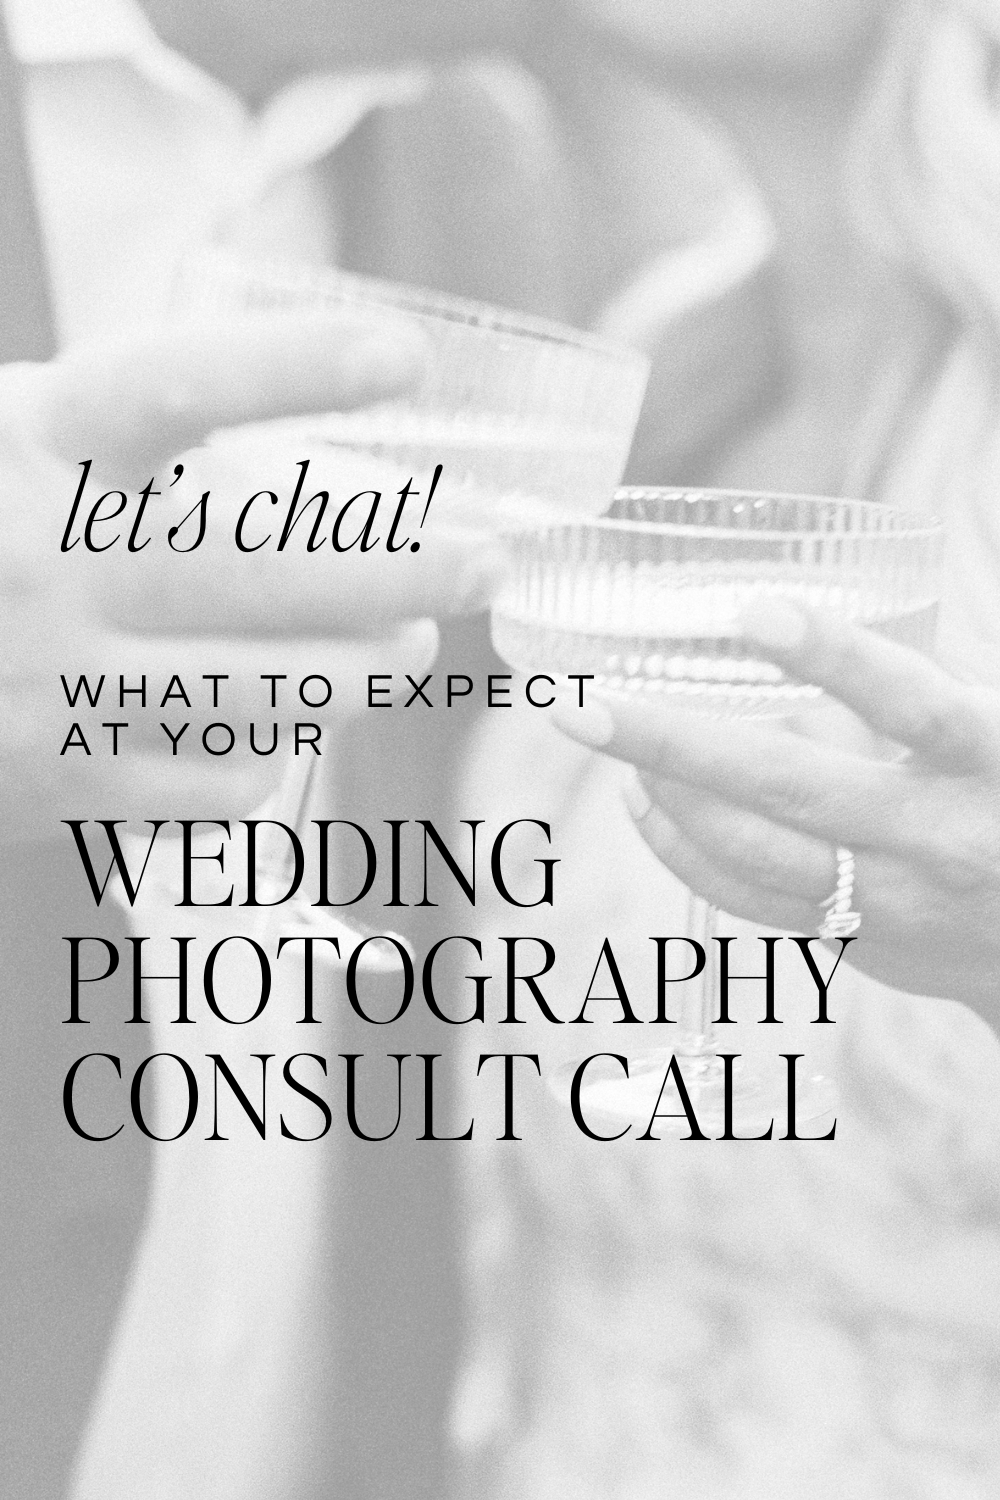 What to expect at your wedding photography consultation call